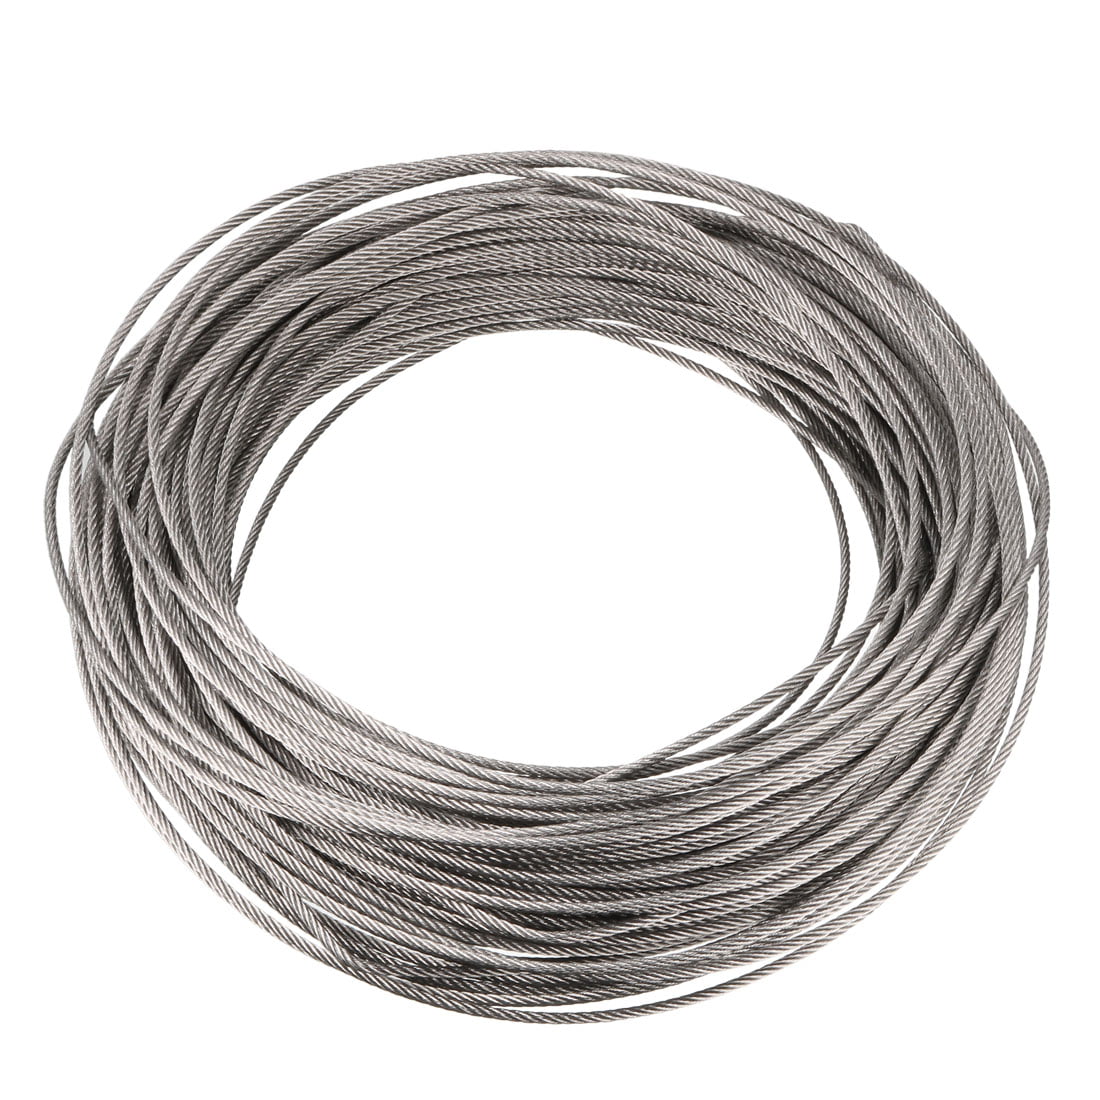 Uxcell 1.5mm Dia 25m 82ft Length 304 Stainless Steel Wire Rope